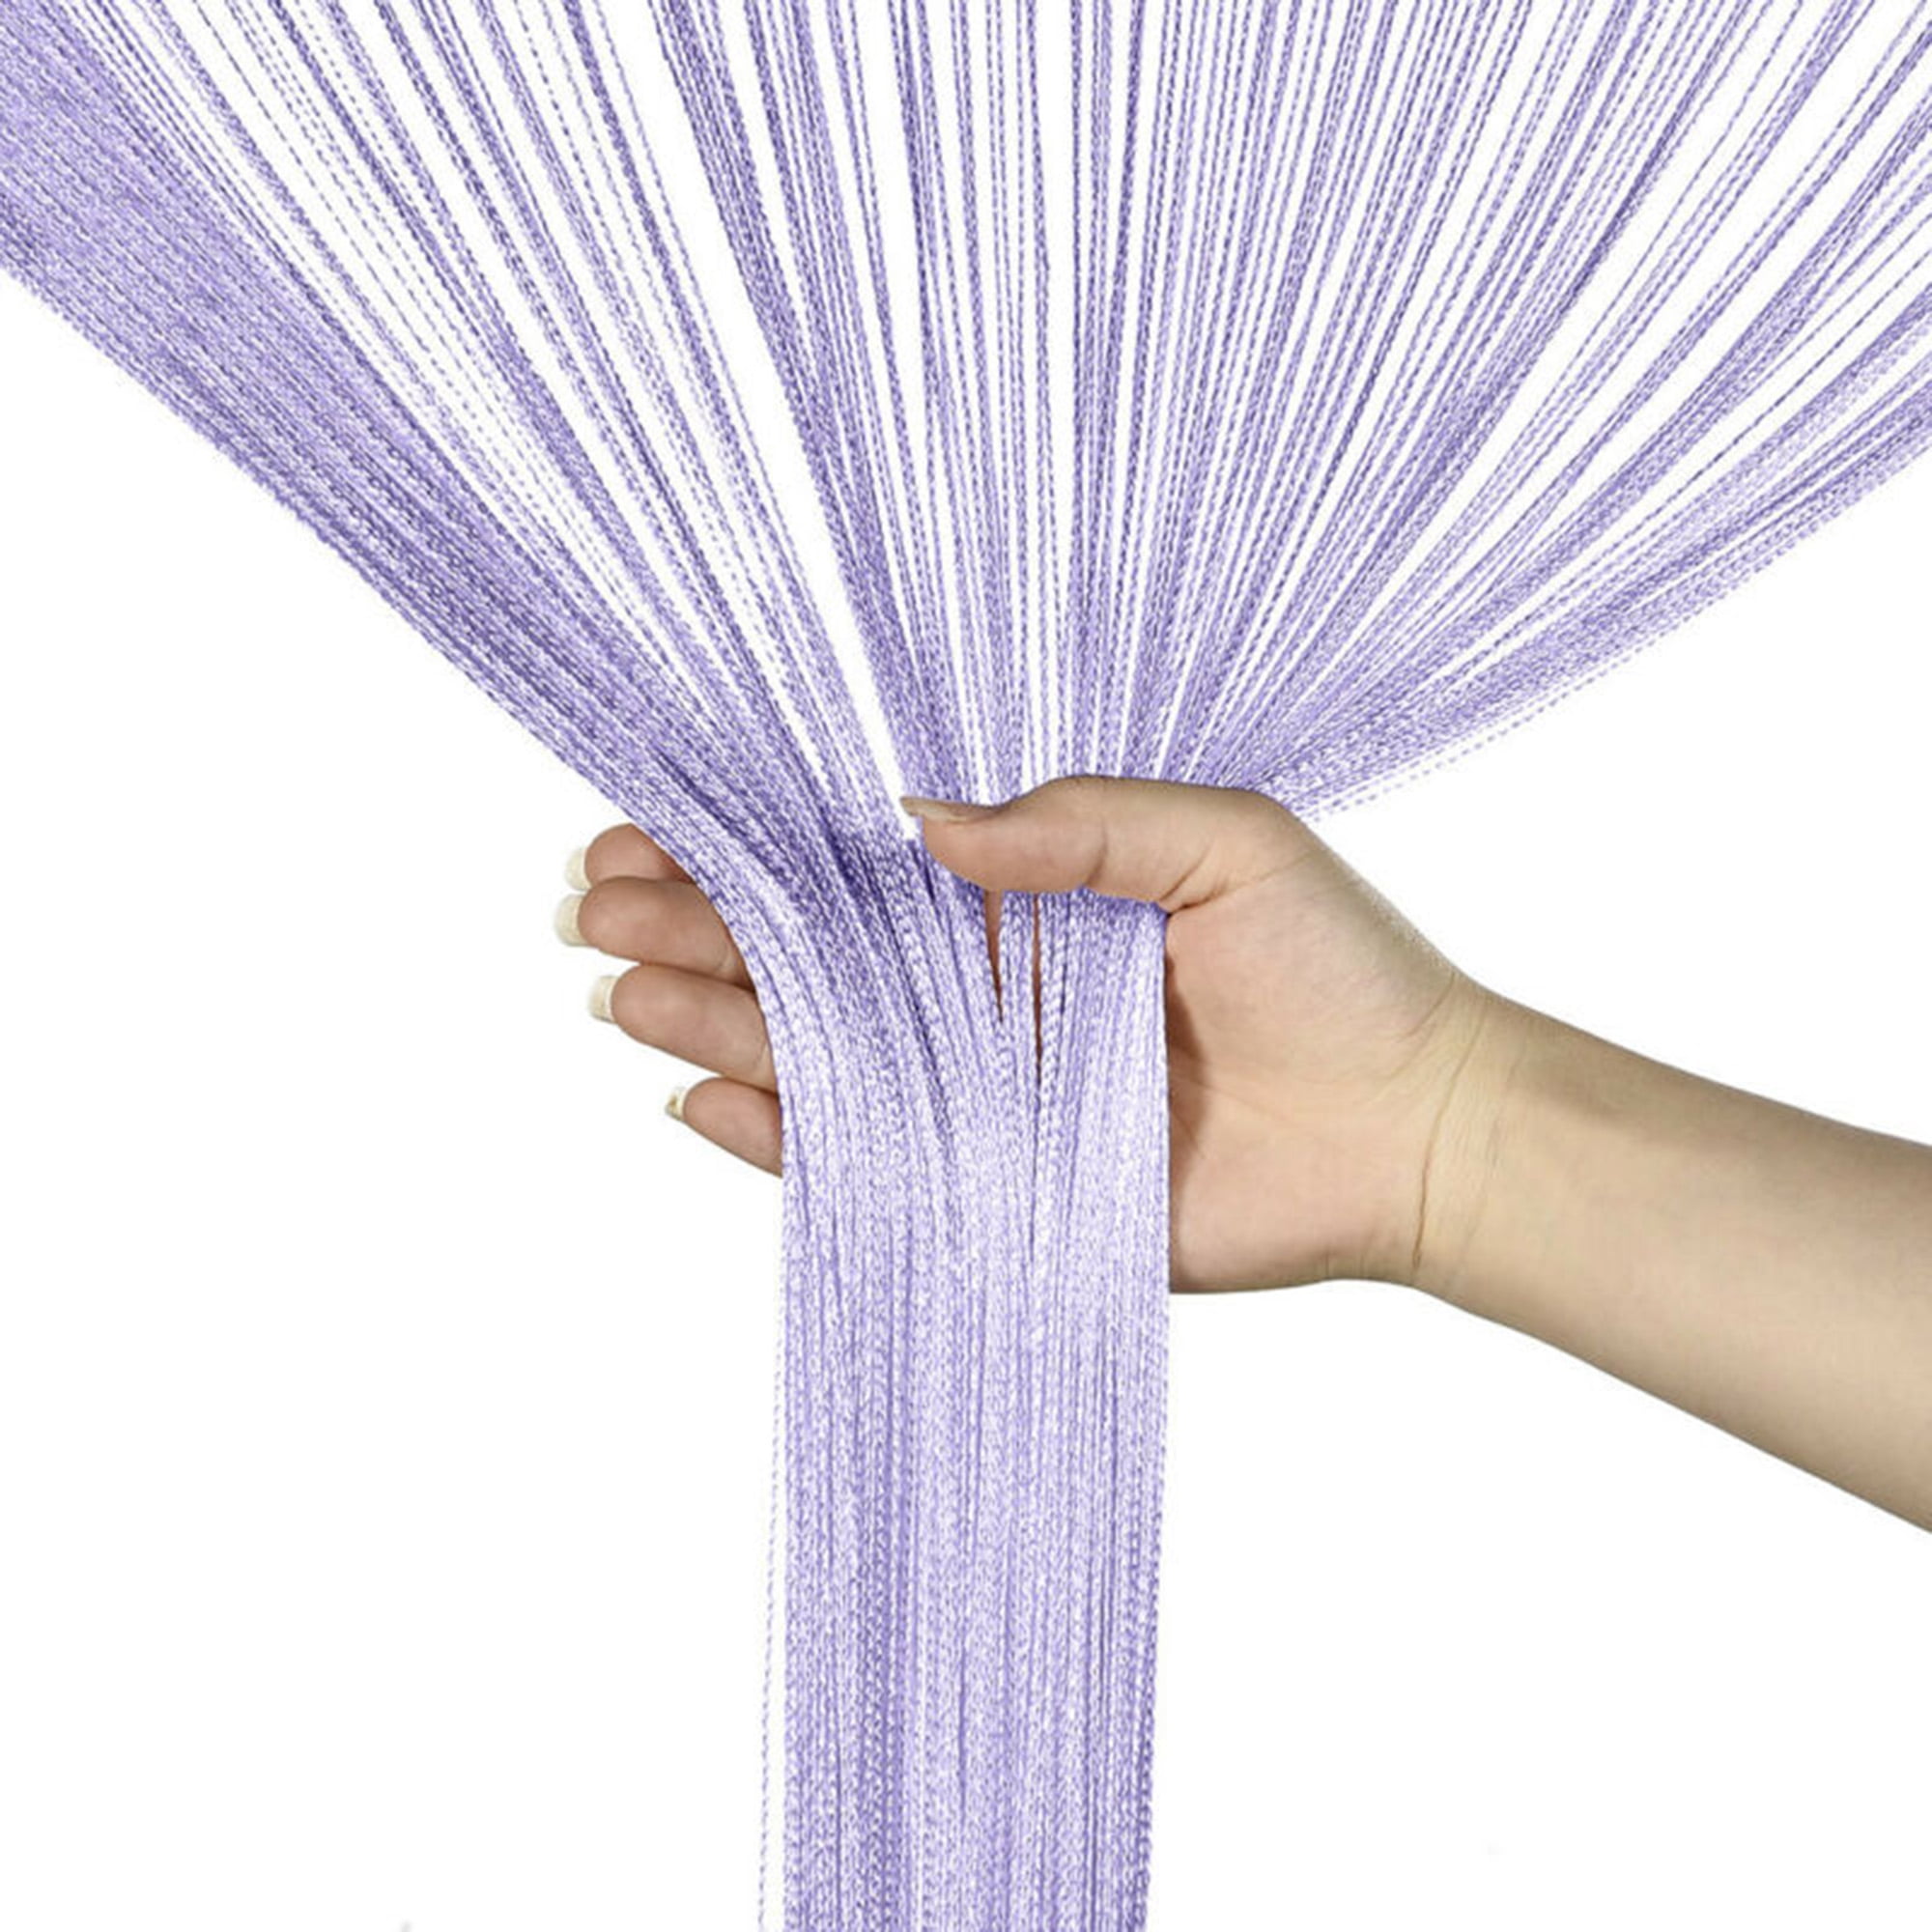 CRYSTAL LOOK  BEADS LILAC/MAUVE/  BEADED CURTAIN VOILE ROPE TIEBACK £3.99 EACH 